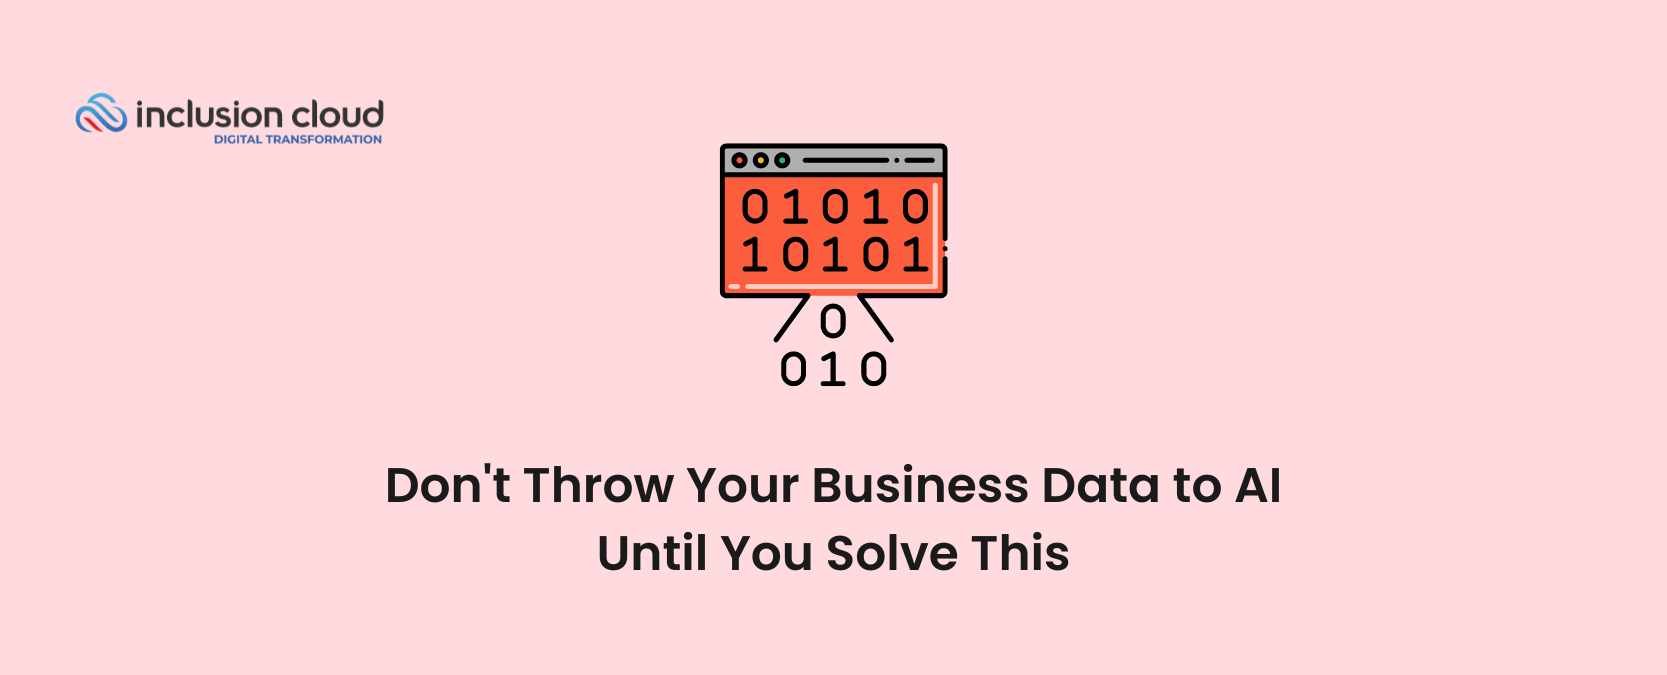 Don't Throw Your Business Data to AI Until You Solve This